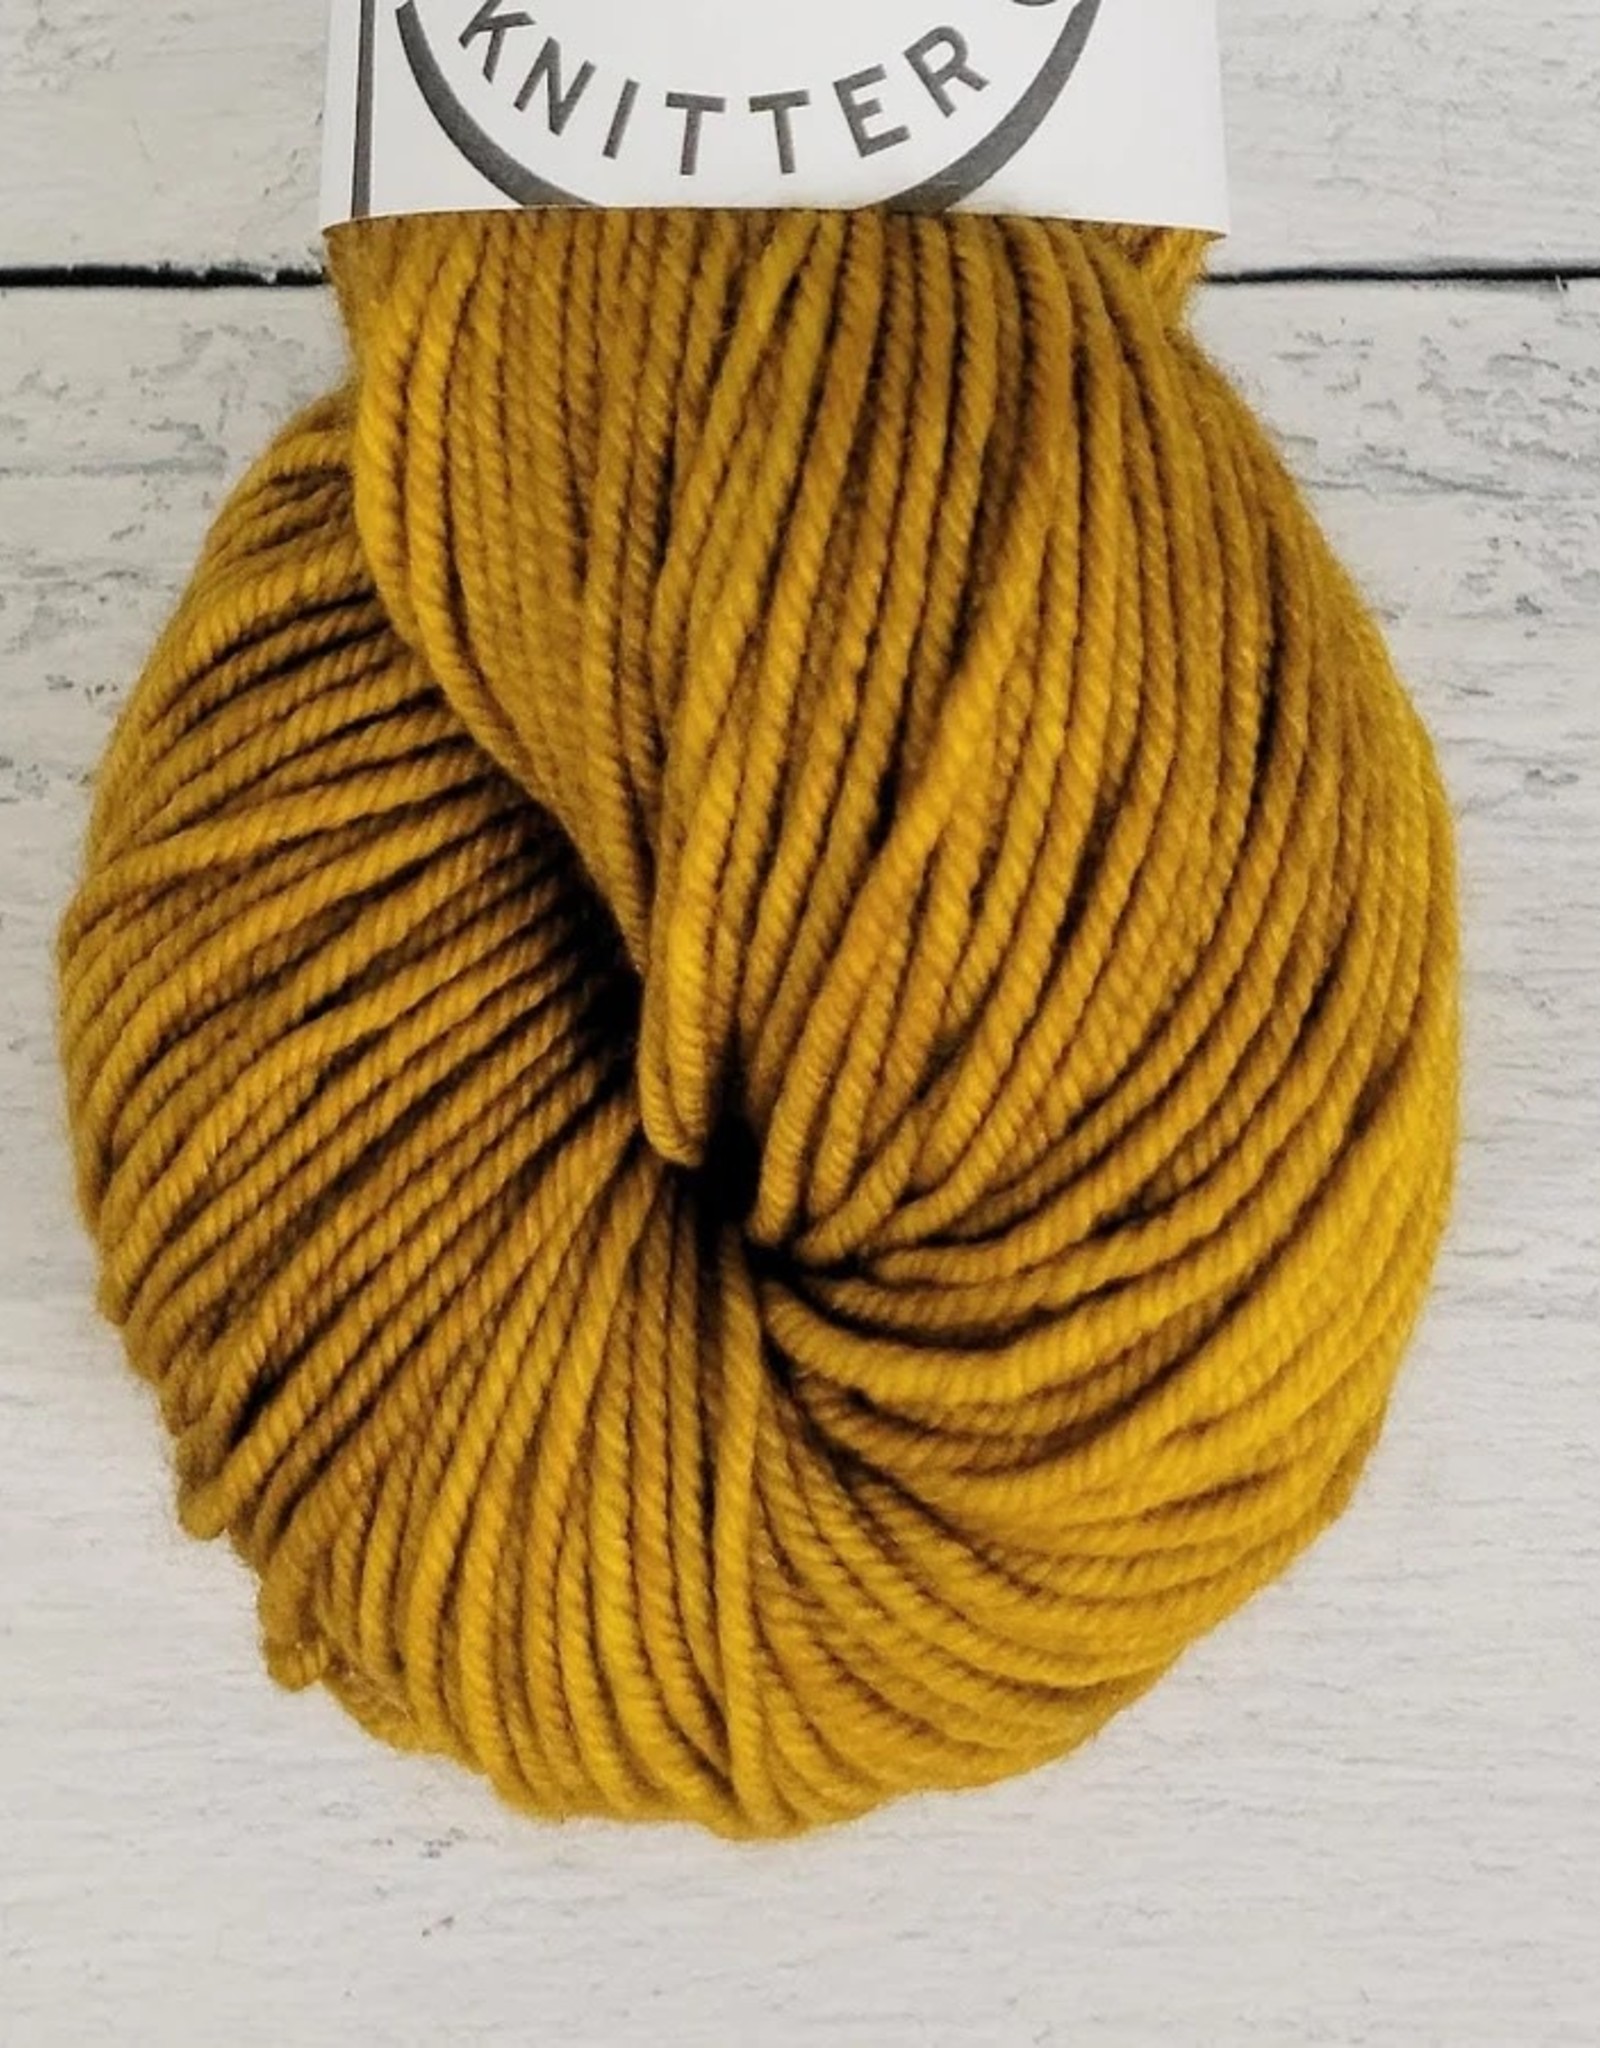 Plucky Knitter Luxe Merino Worsted triple crown